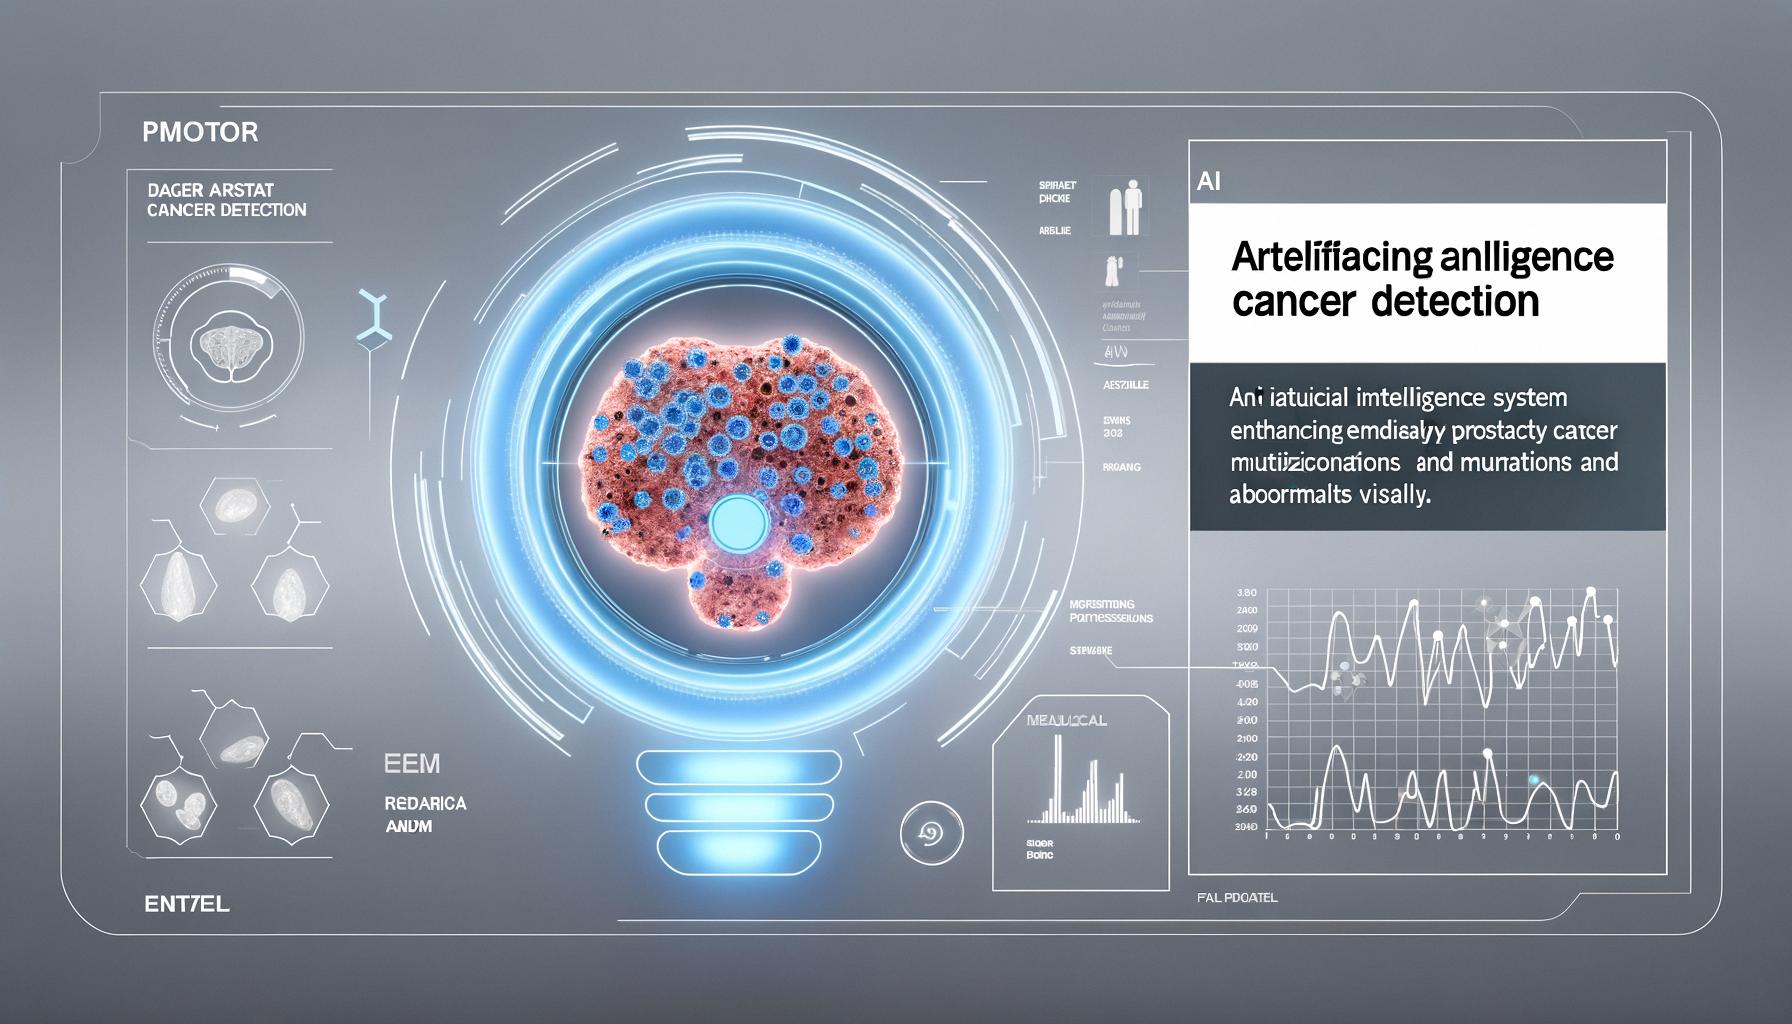 AI and fluorescence dye improve prostate cancer detection and treatment outcomes.